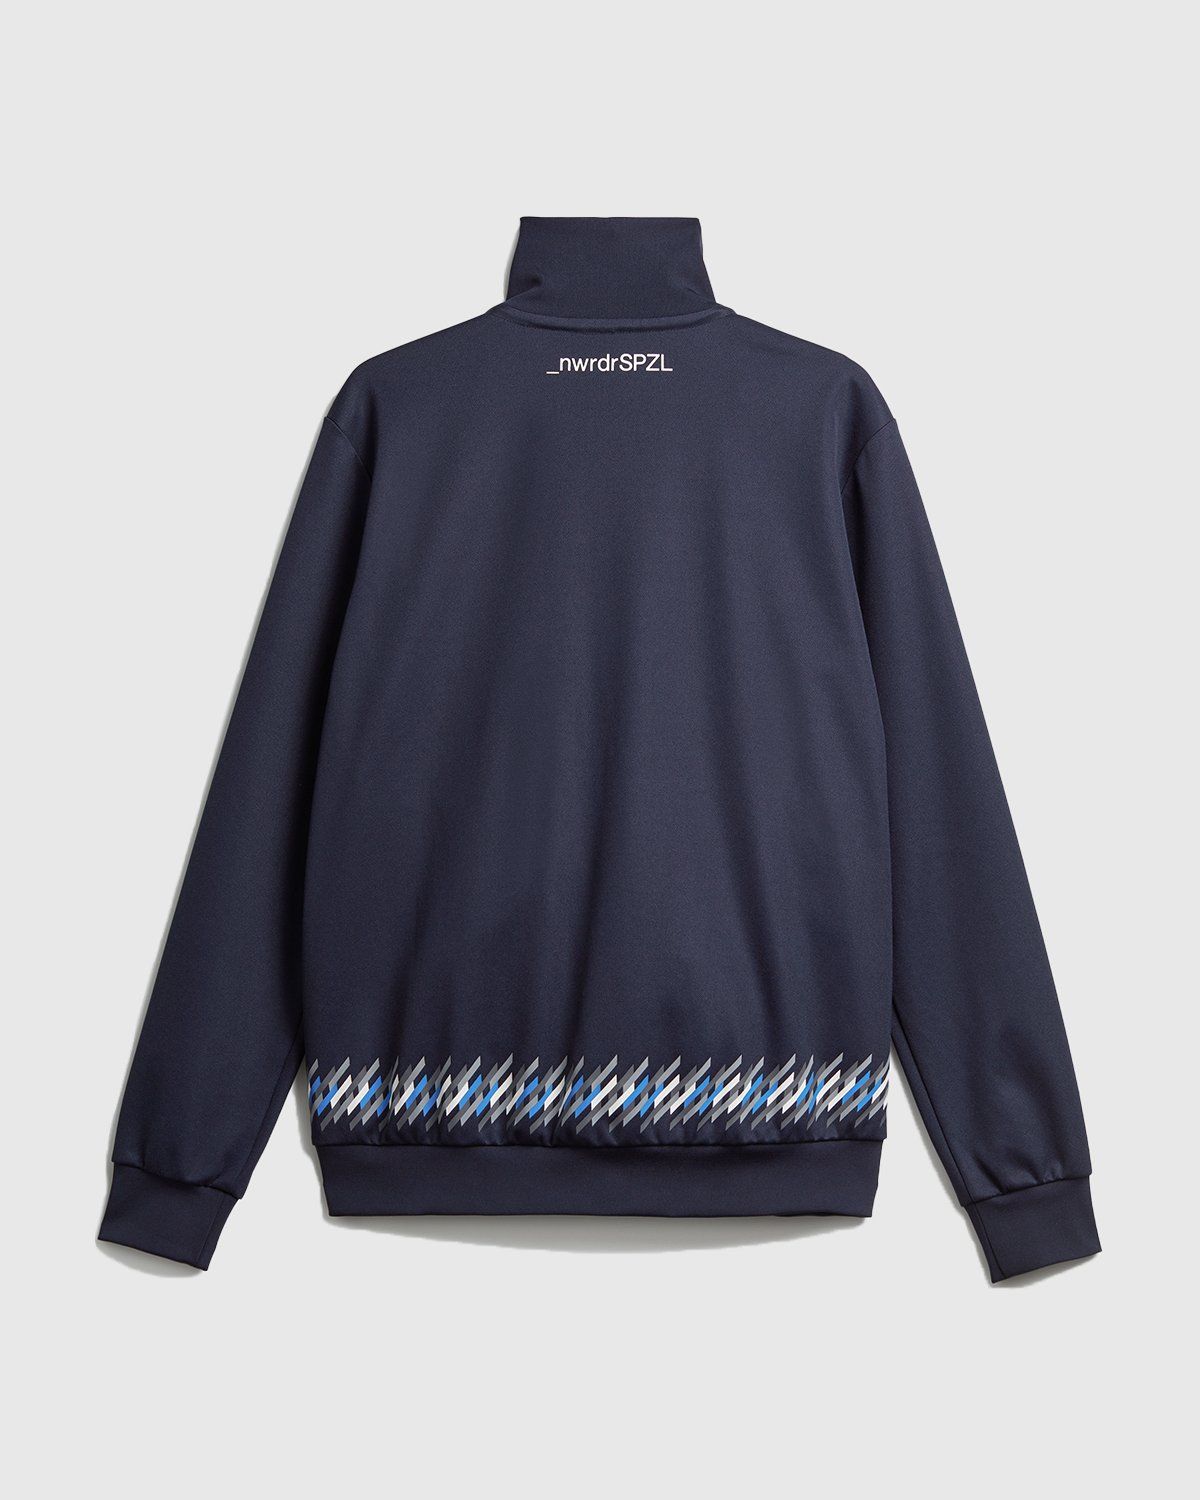 Adidas – Track Top Spezial x New Order Navy - Track Jackets - Blue - Image 2